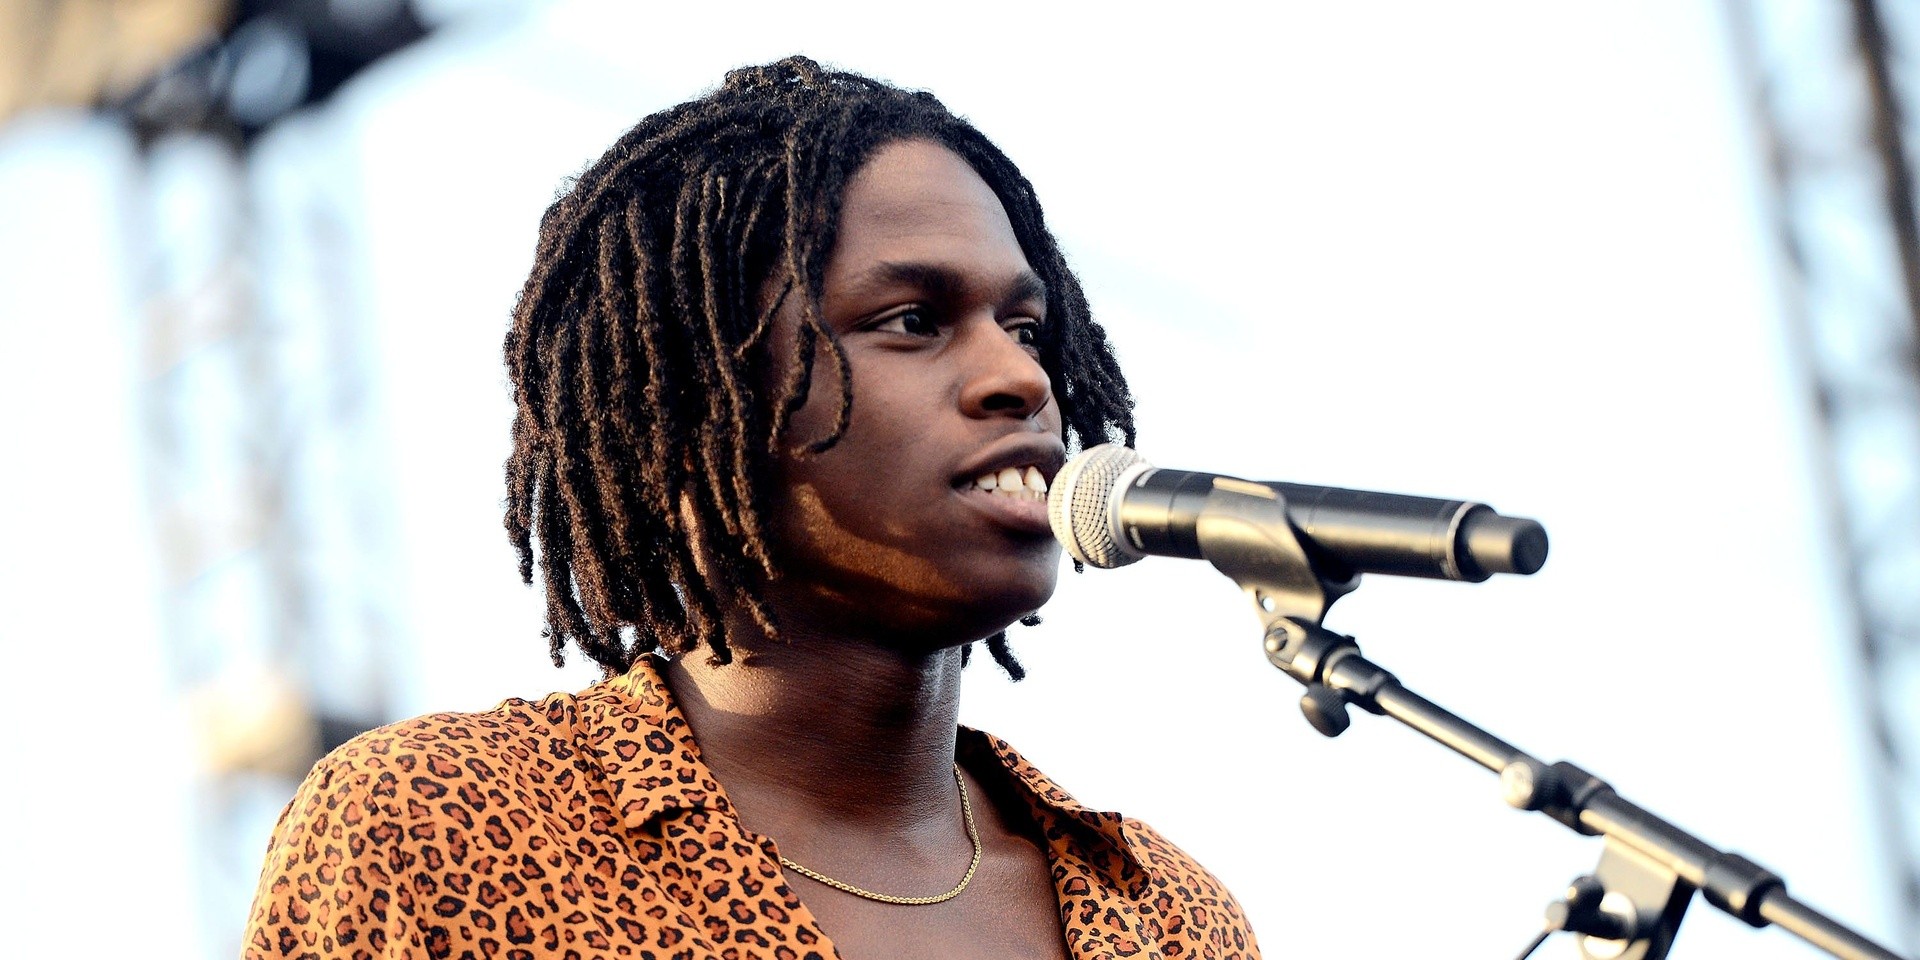 Tickets for Daniel Caesar's Singapore show are all sold out